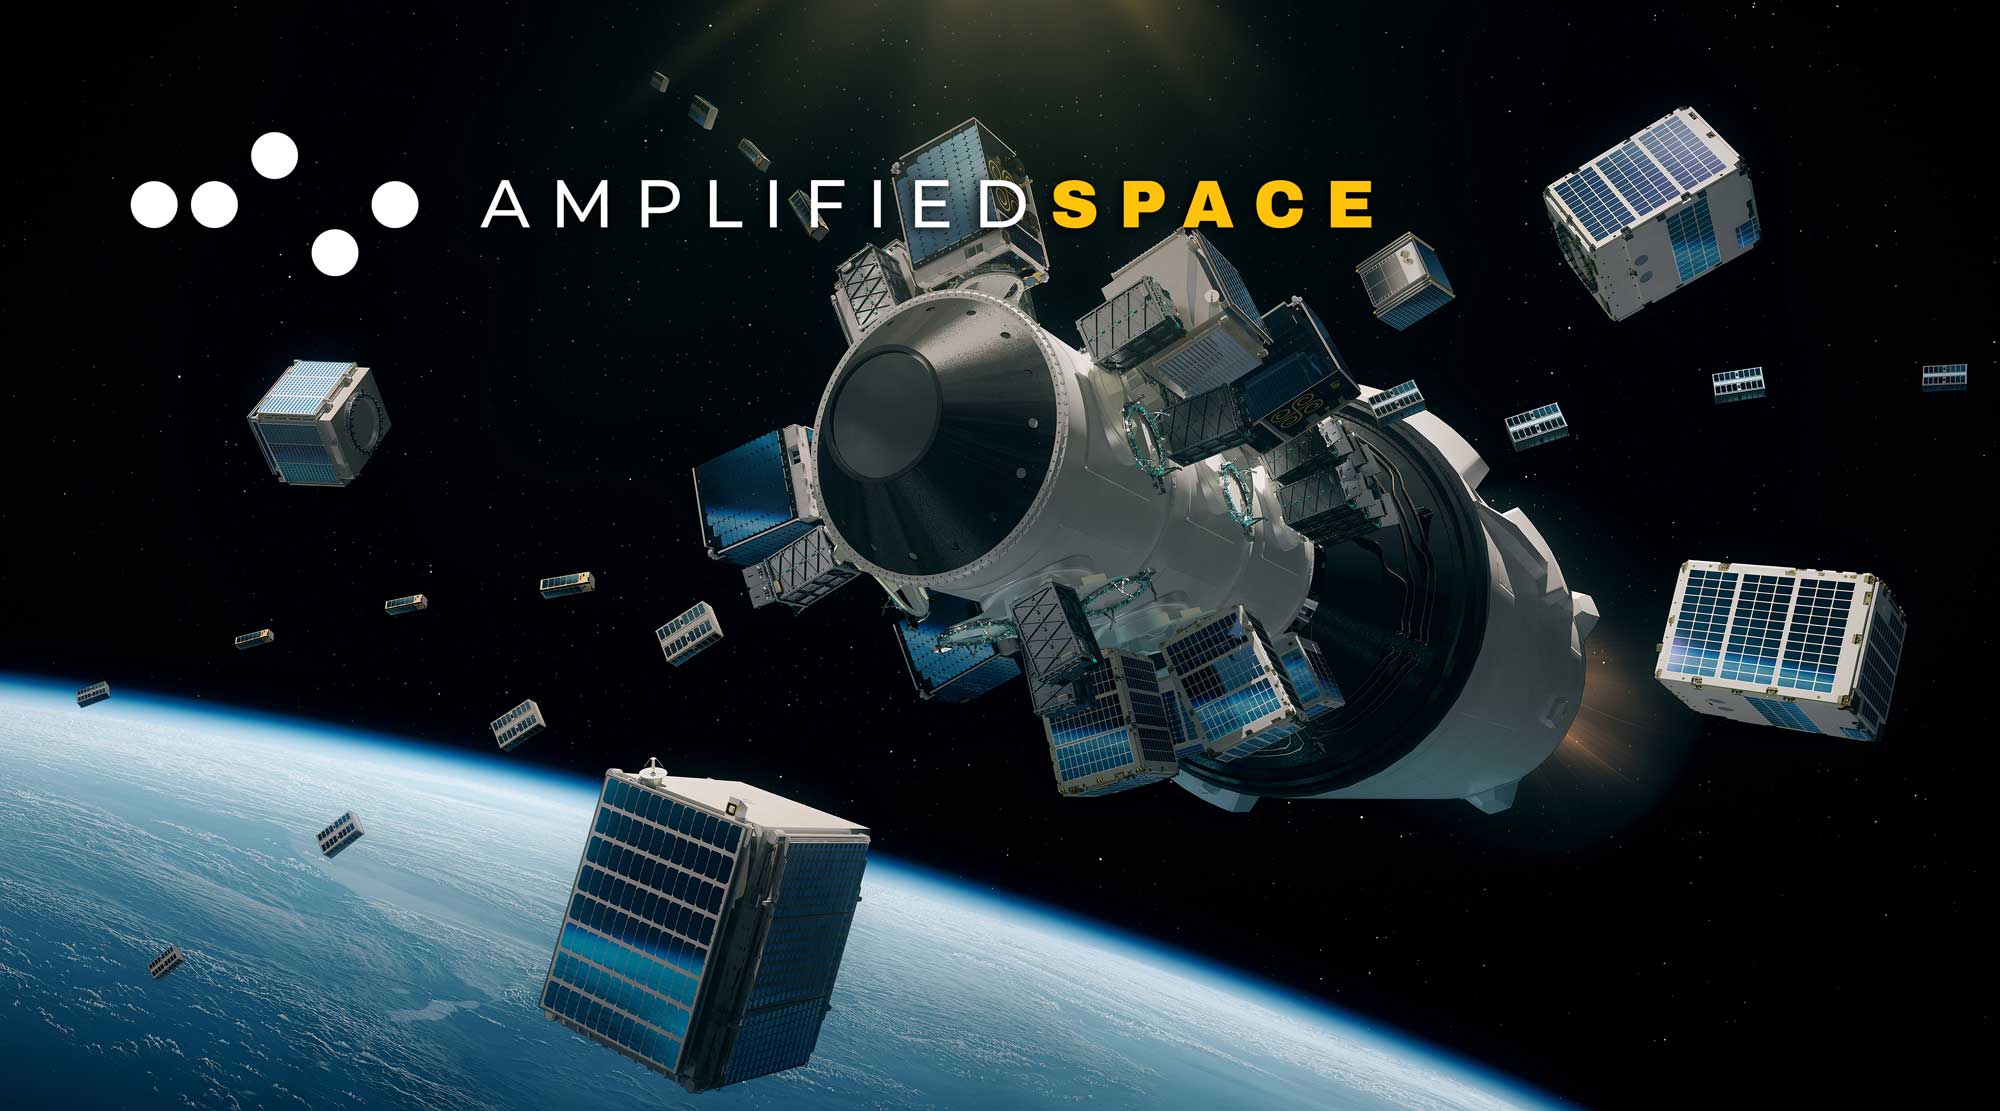 Spacecraft Power System Development Startup Amplified Space Pitches at Angel Capital Summit